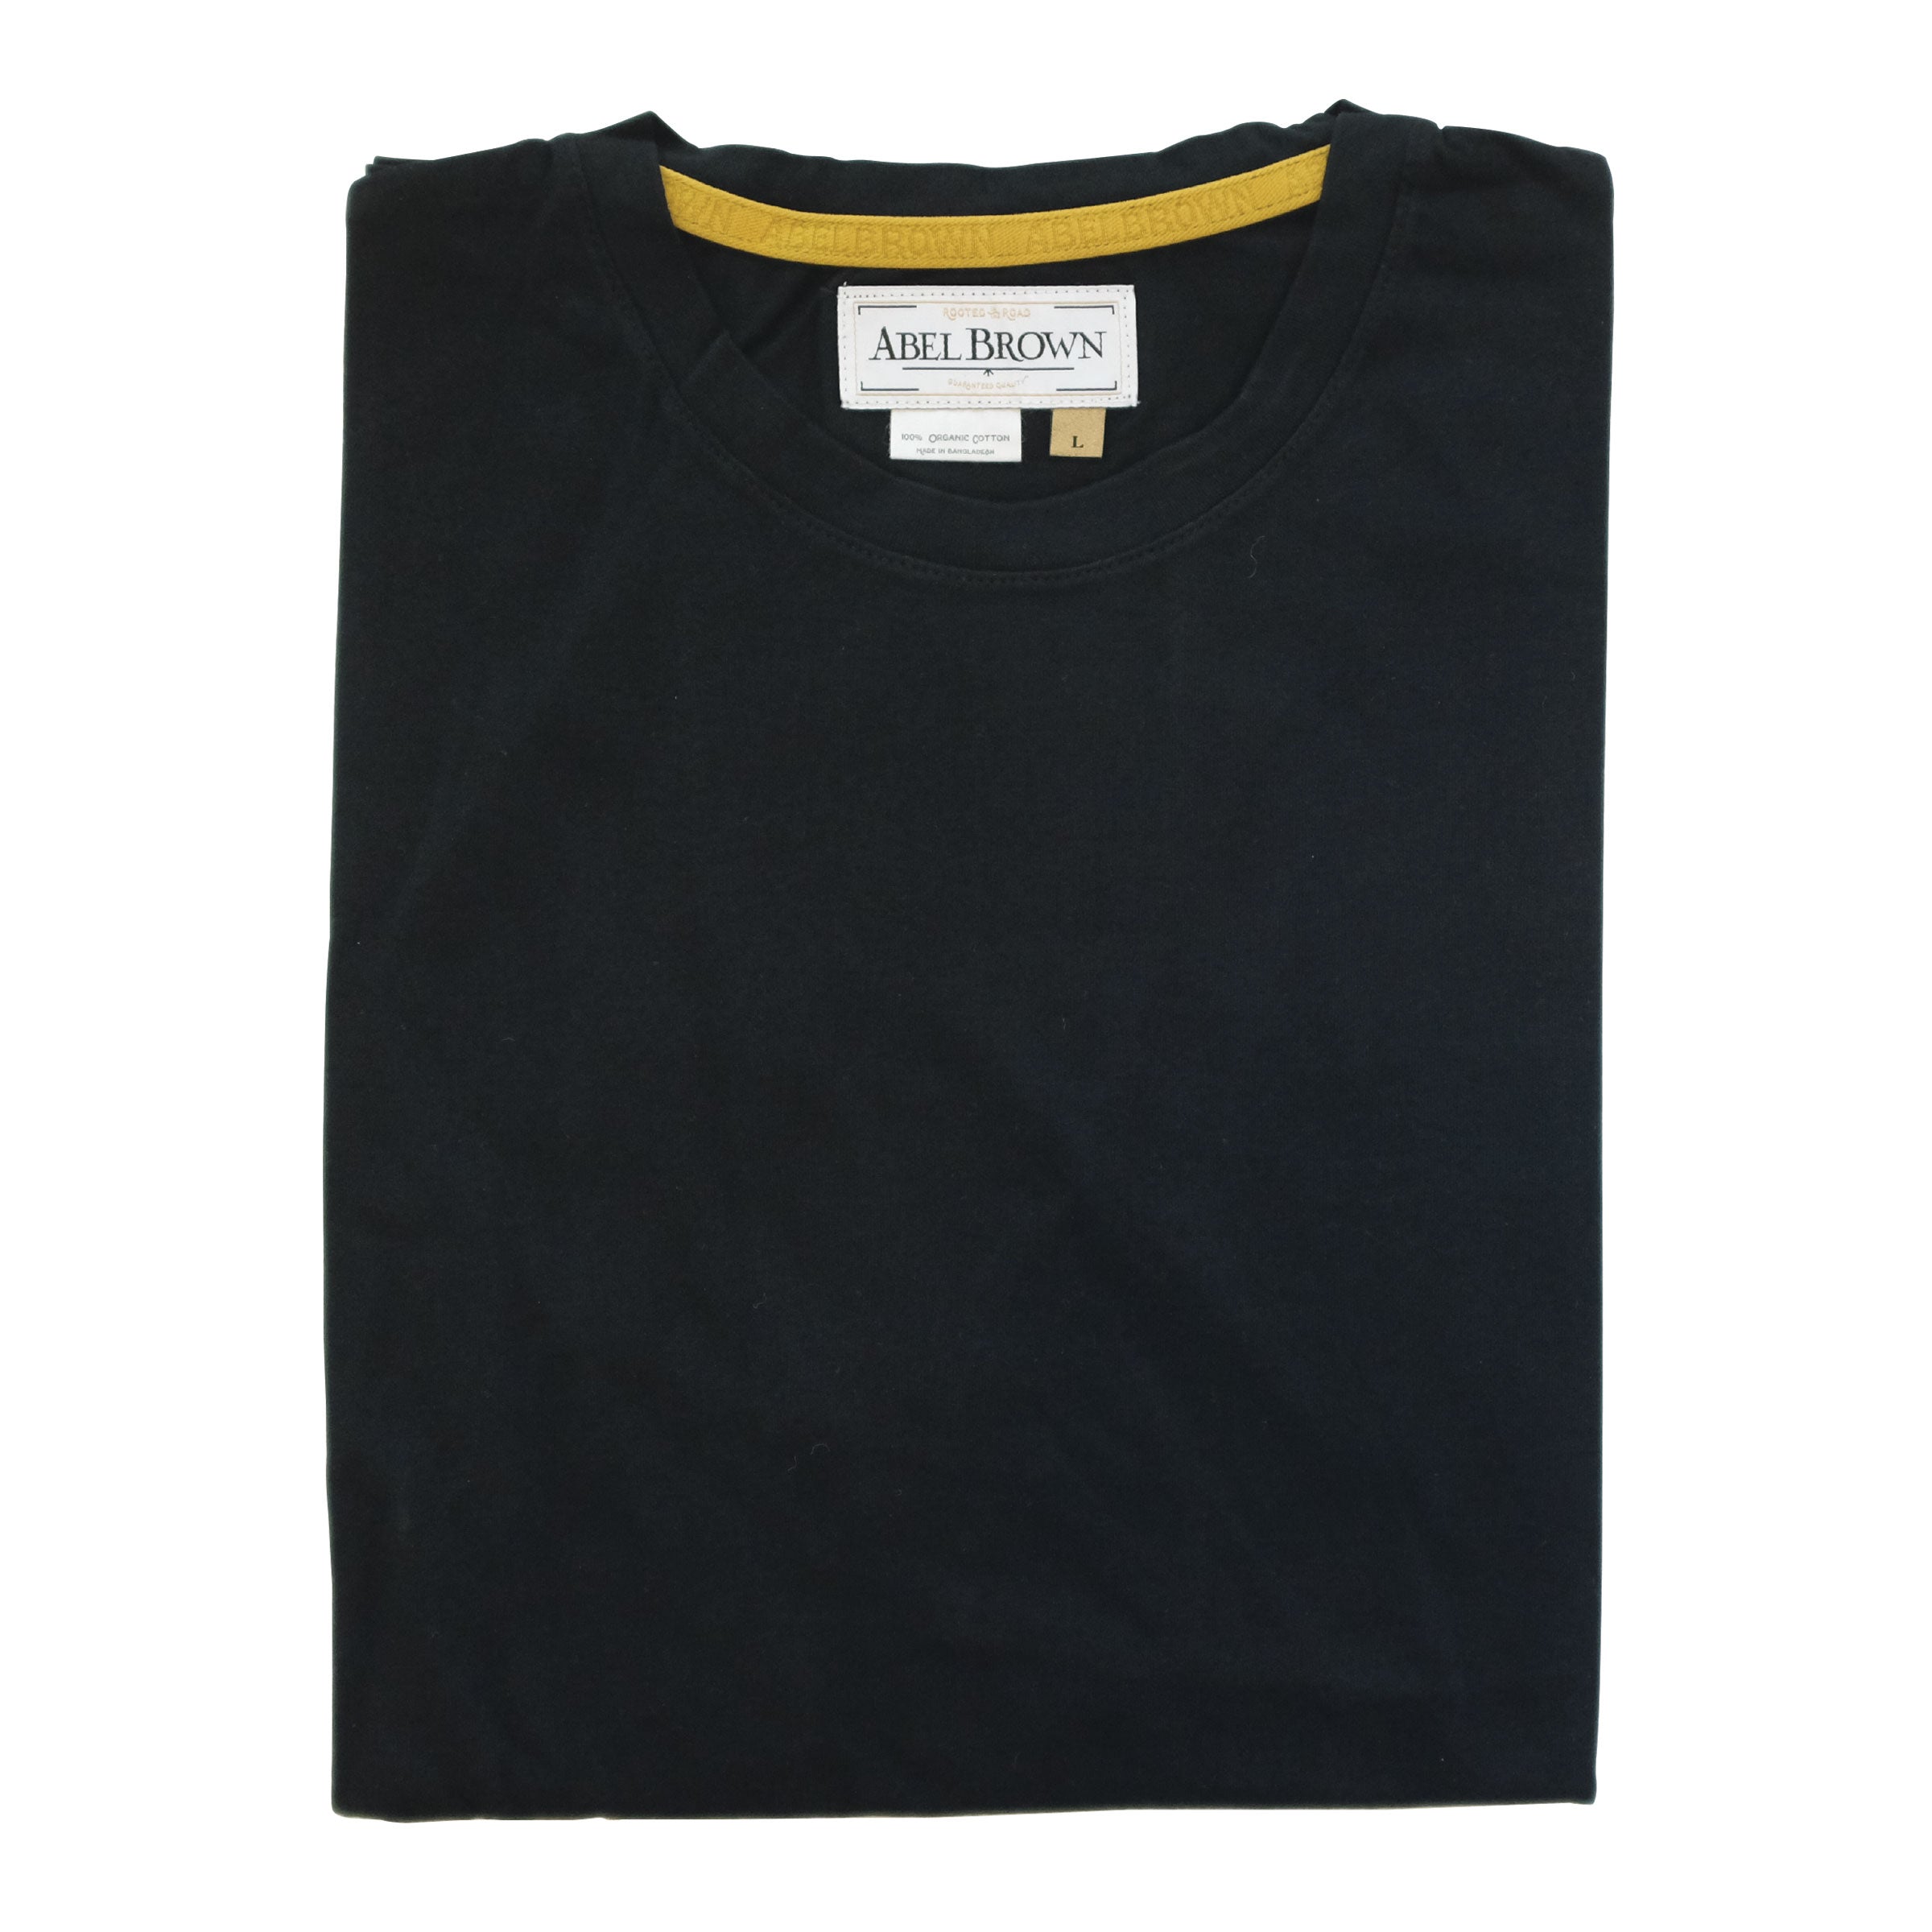 Standard Issue – STANDARD ISSUE TEES